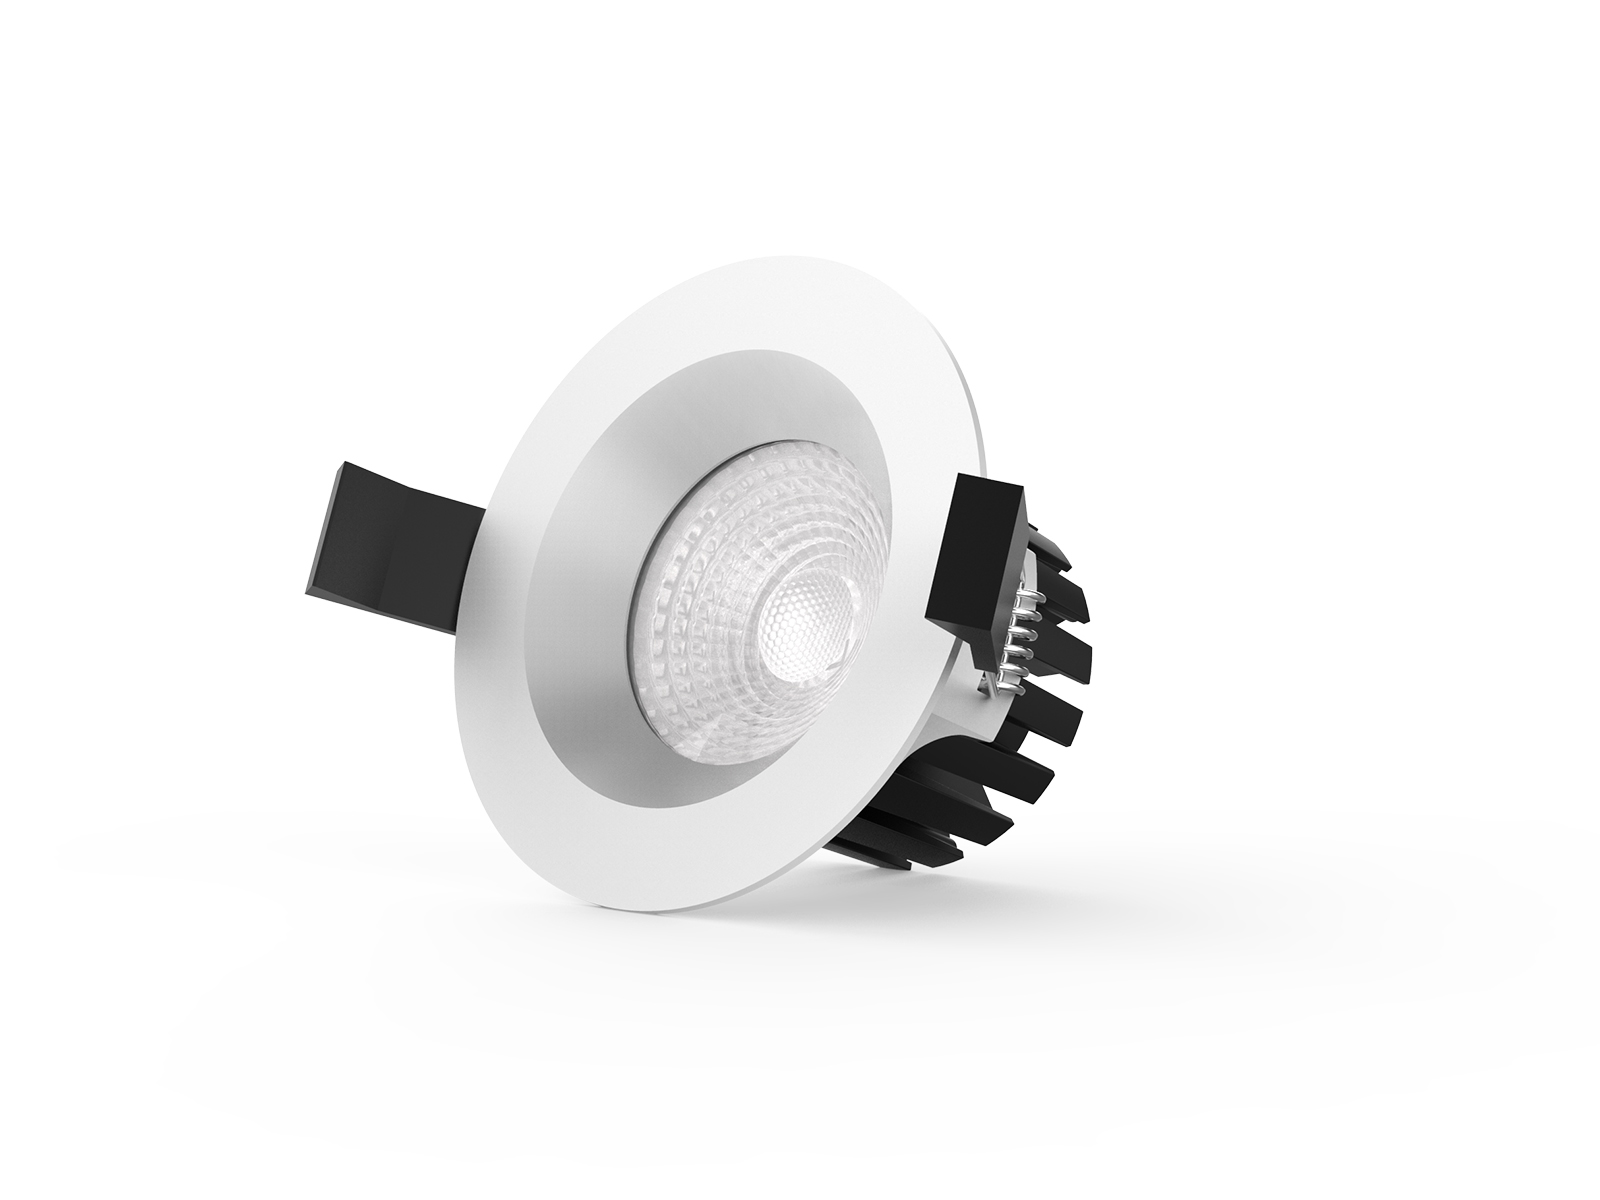 0 10v dimmable led downlights